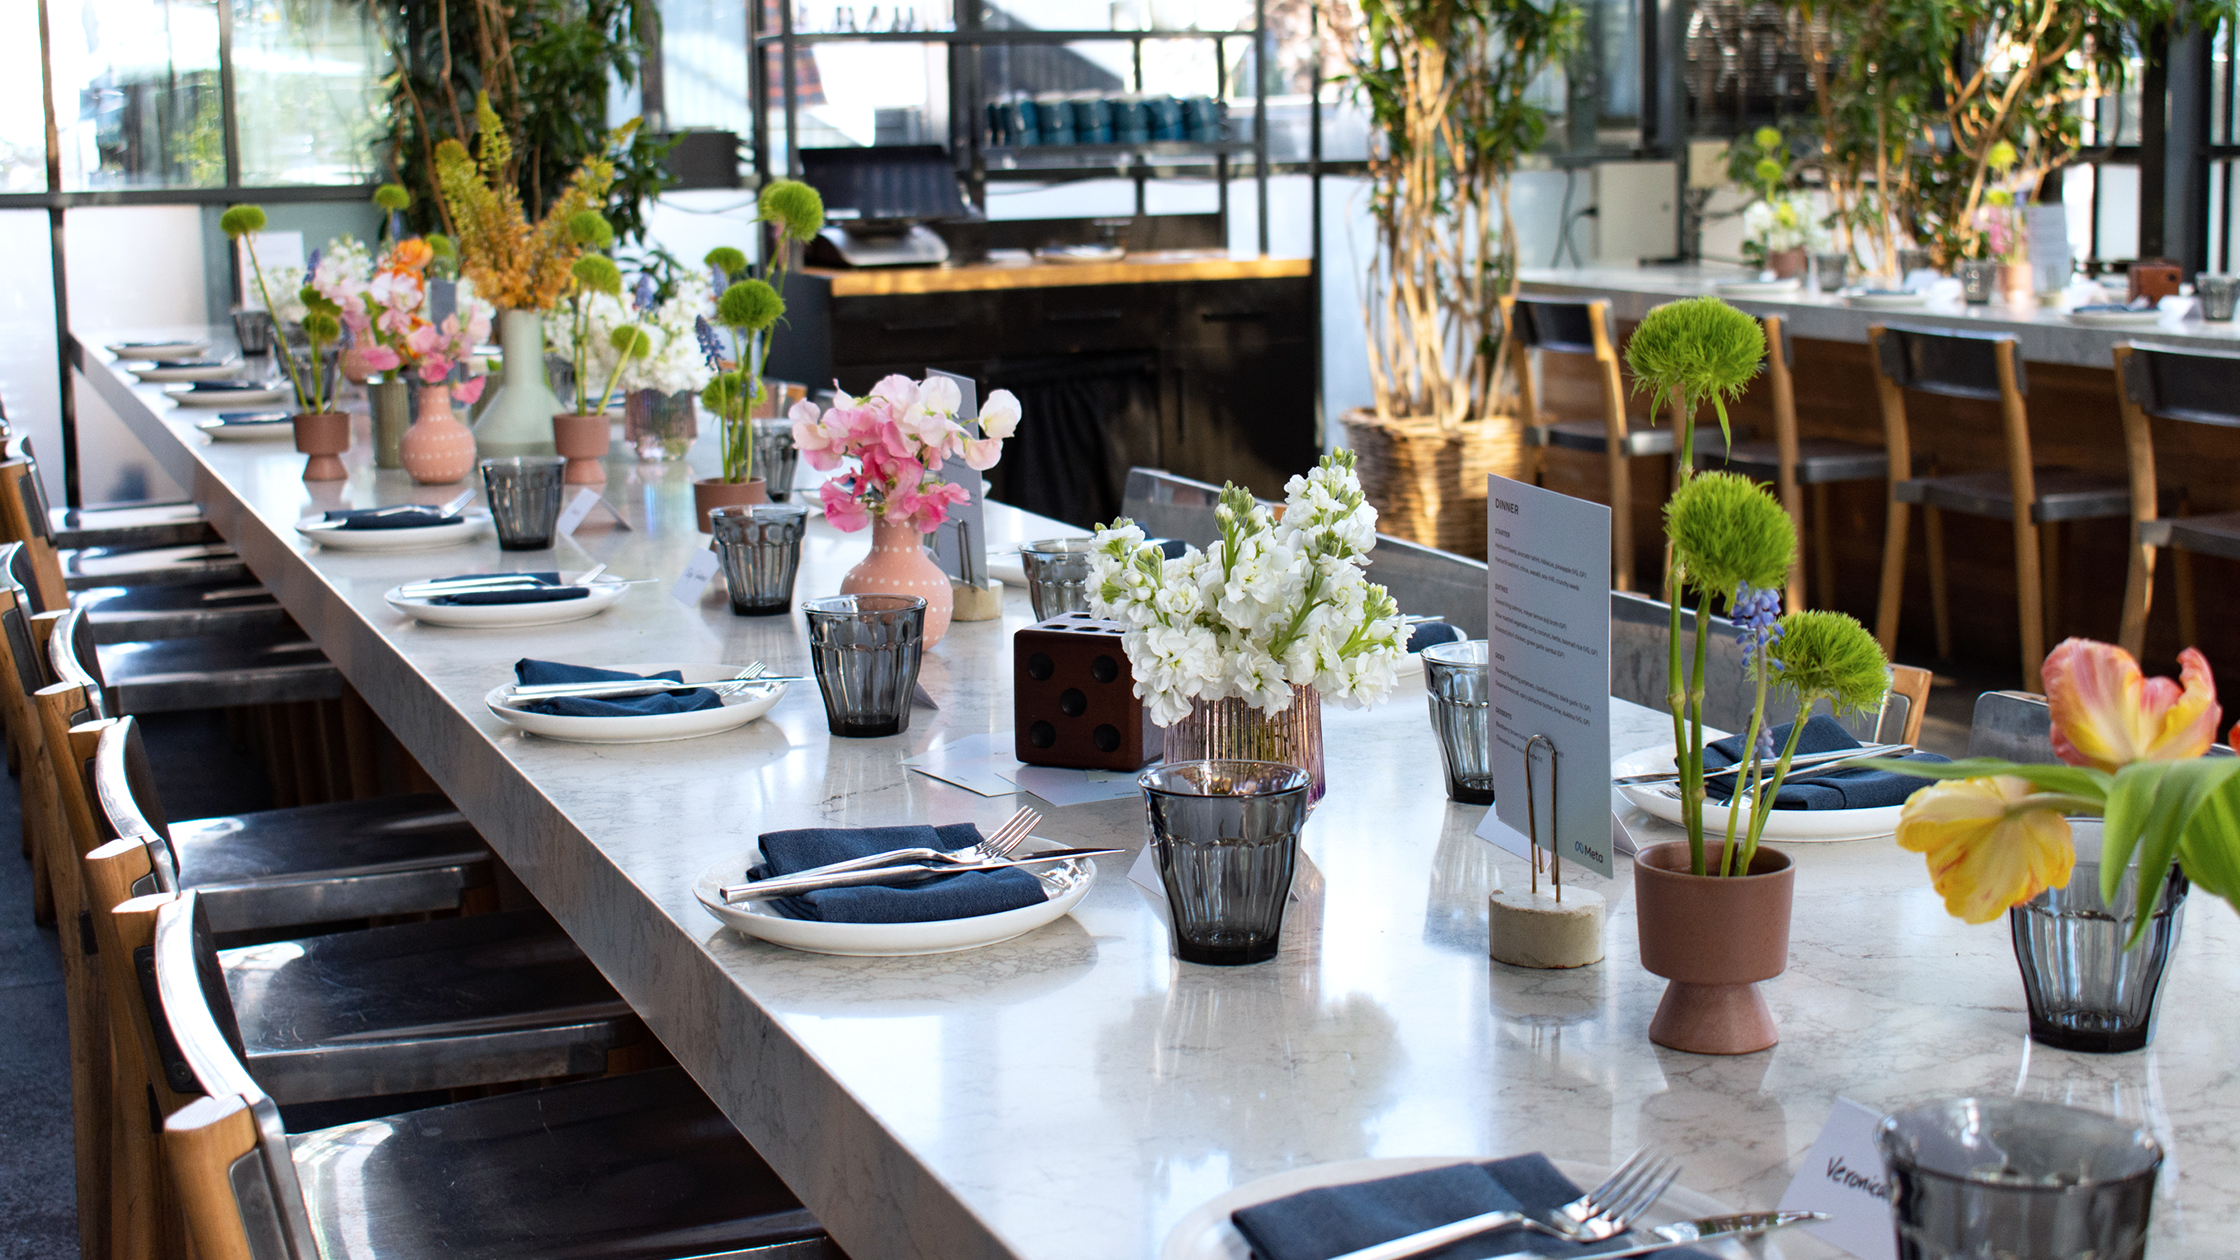 A long dining table set for a meal with a variety of colorful floral centerpieces and neatly arranged table settings including plates, napkins, and cutlery. Modern chairs line the table, and the restaurant interior features large windows and greenery.